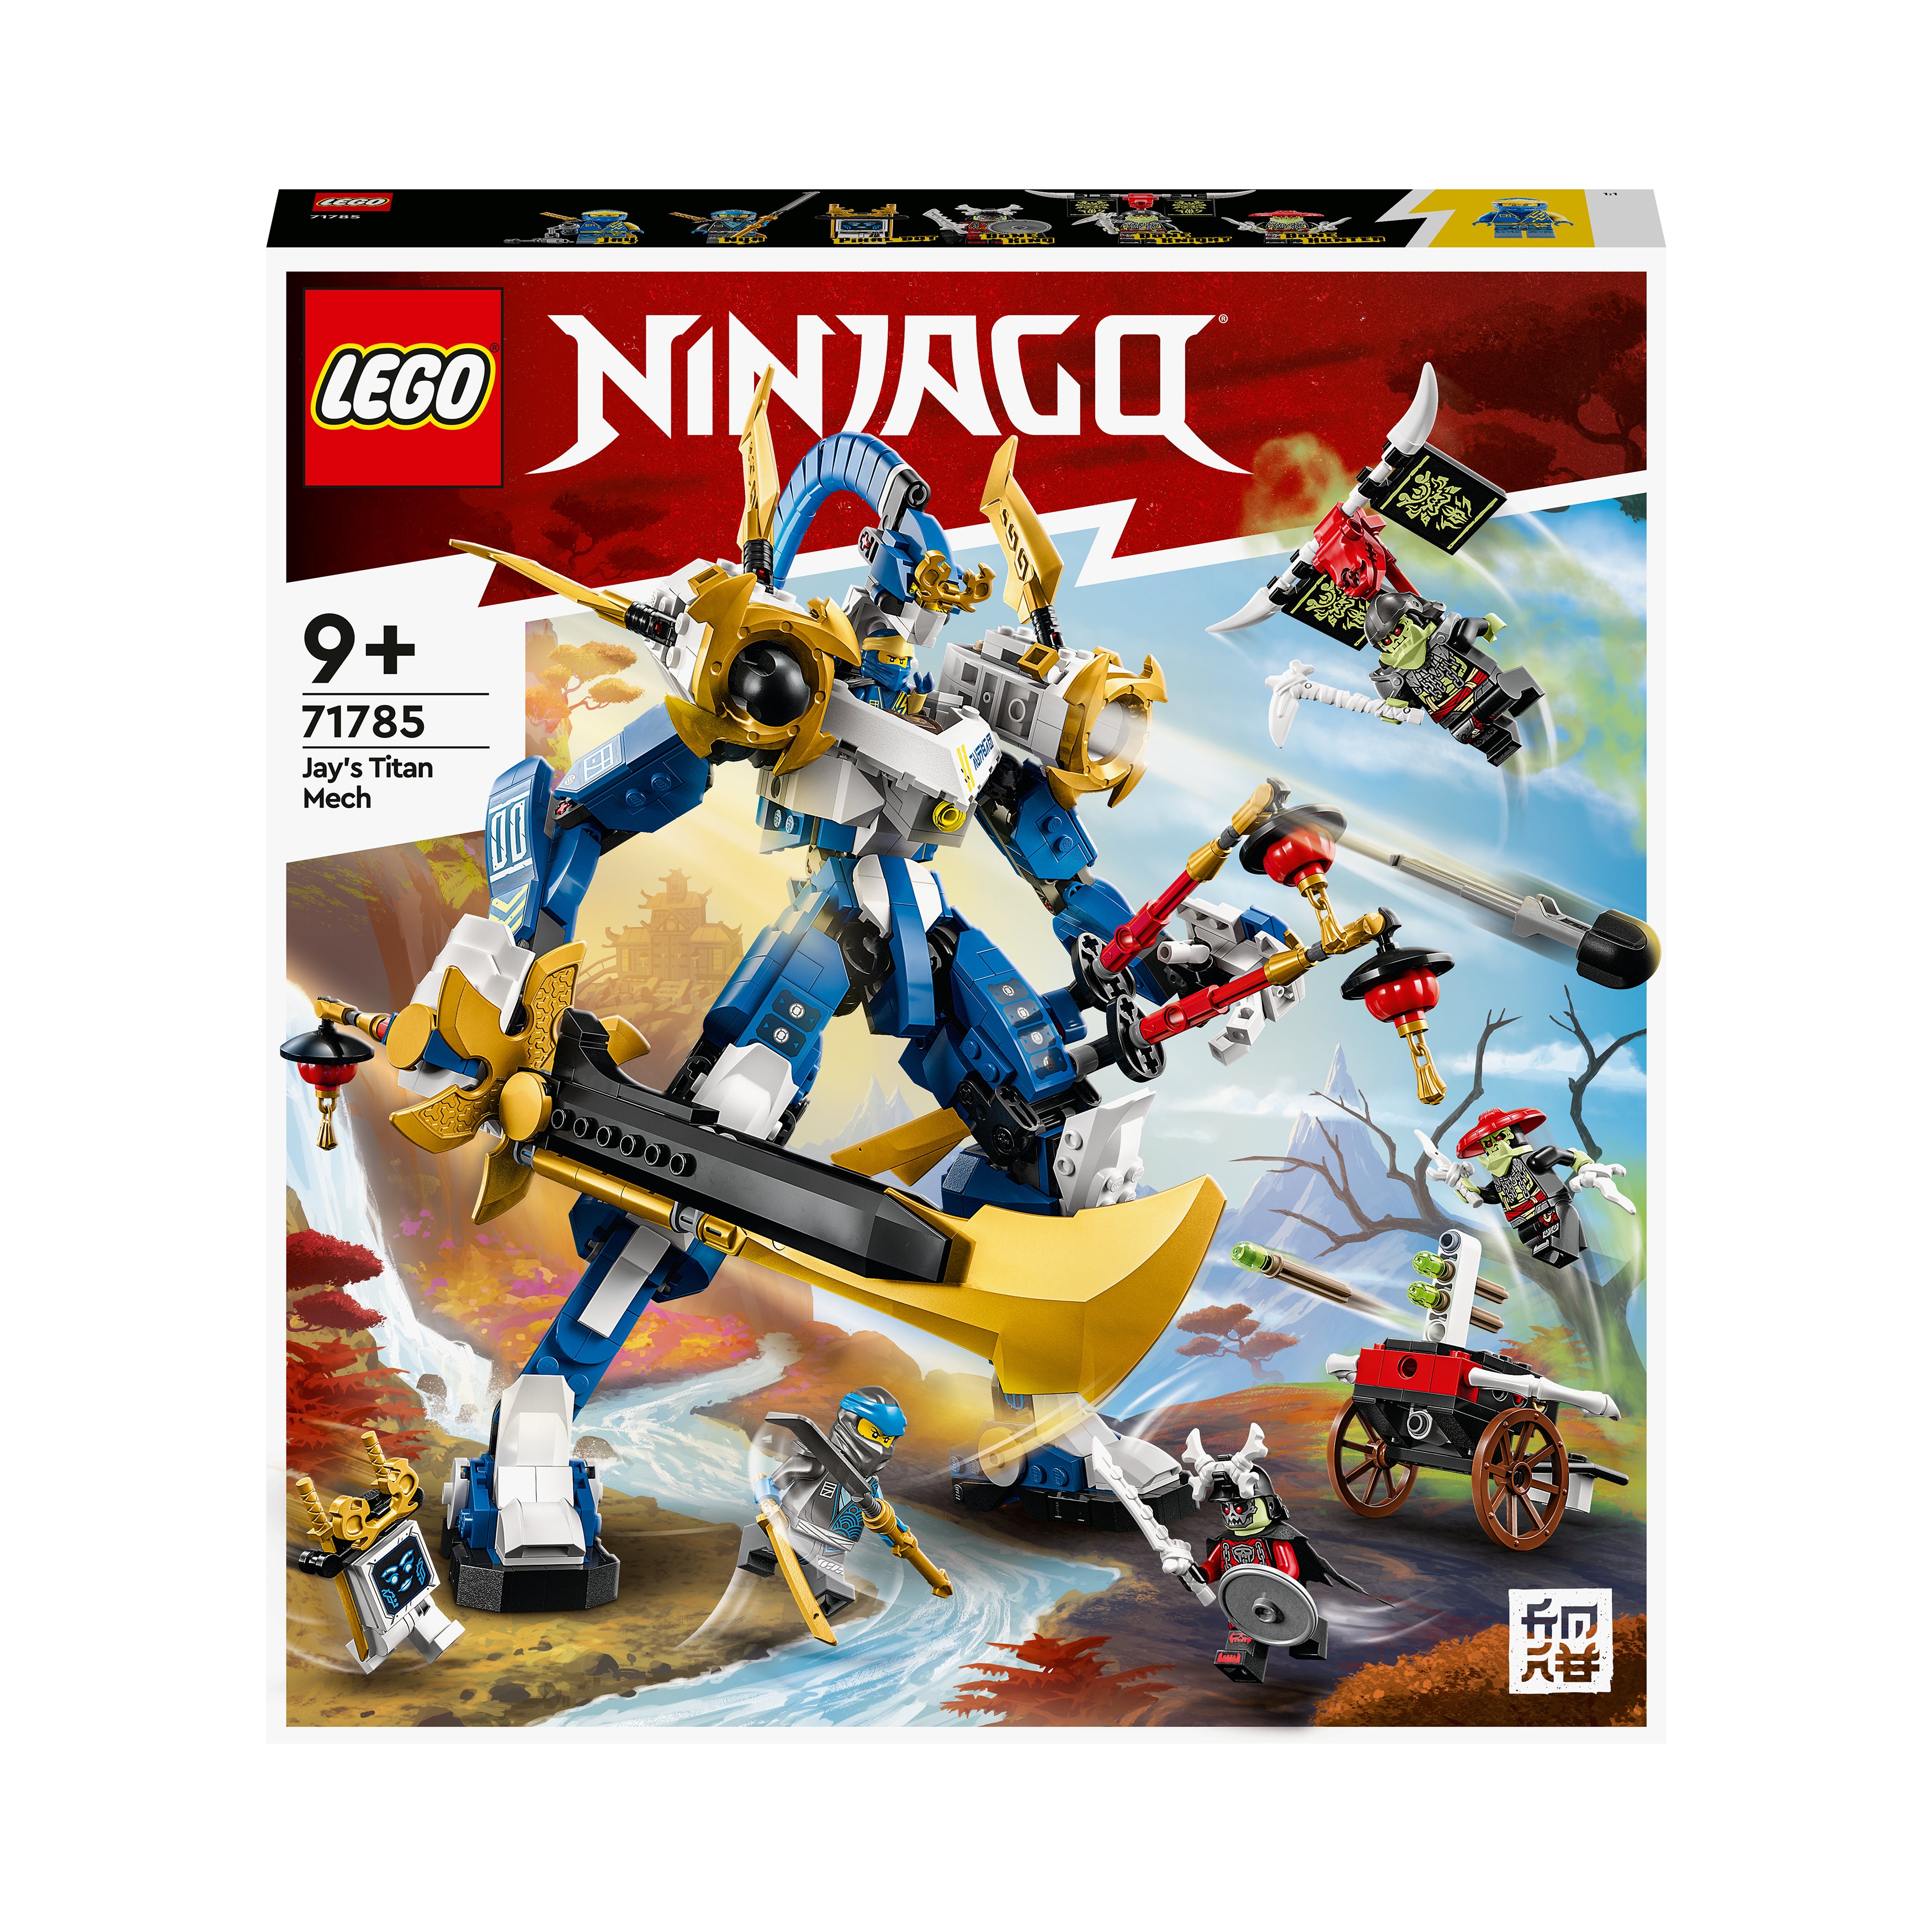 LEGO NINJAGO Lloyd’s Ninja Mech Battle Action Figure Toy 71757 for Kids,  Boys and Girls Ages 4 plus with Snake Figure and Minifigure, Gifts for